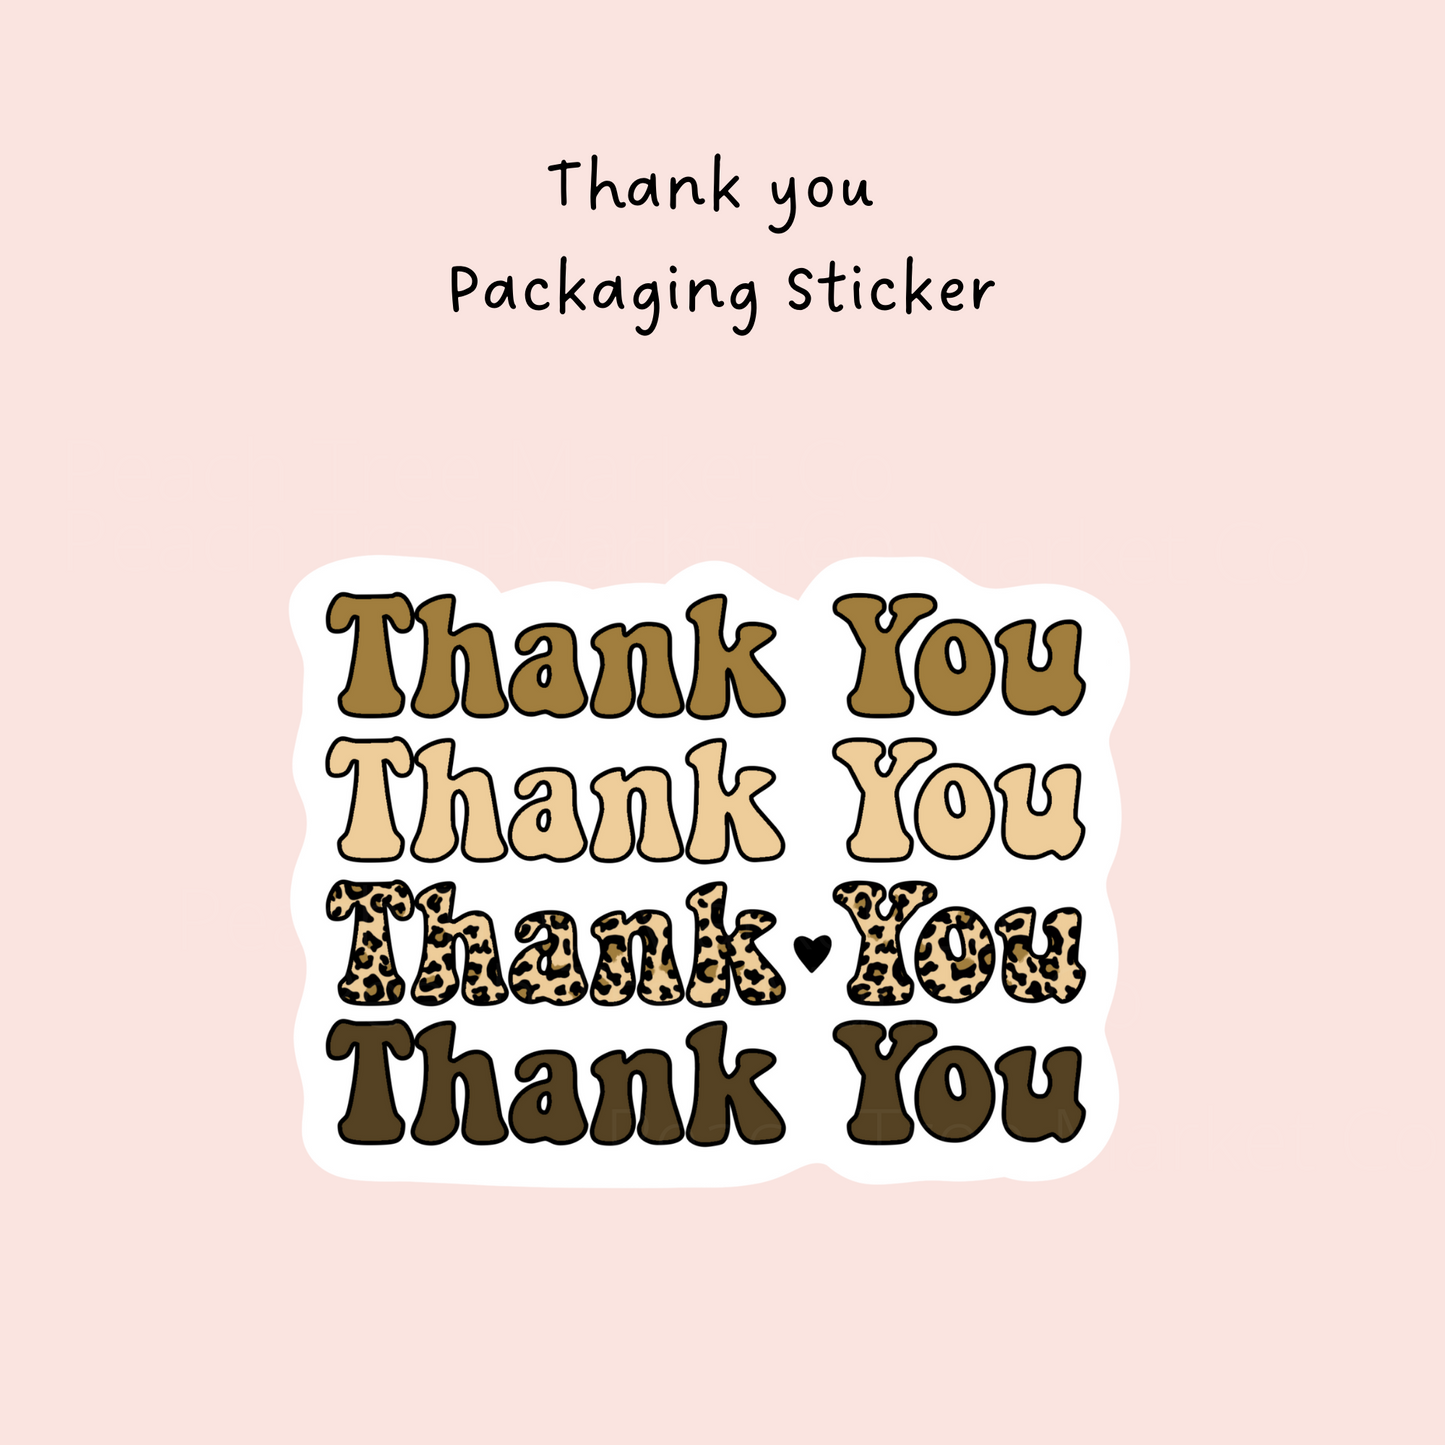 Thank You Packaging Sticker